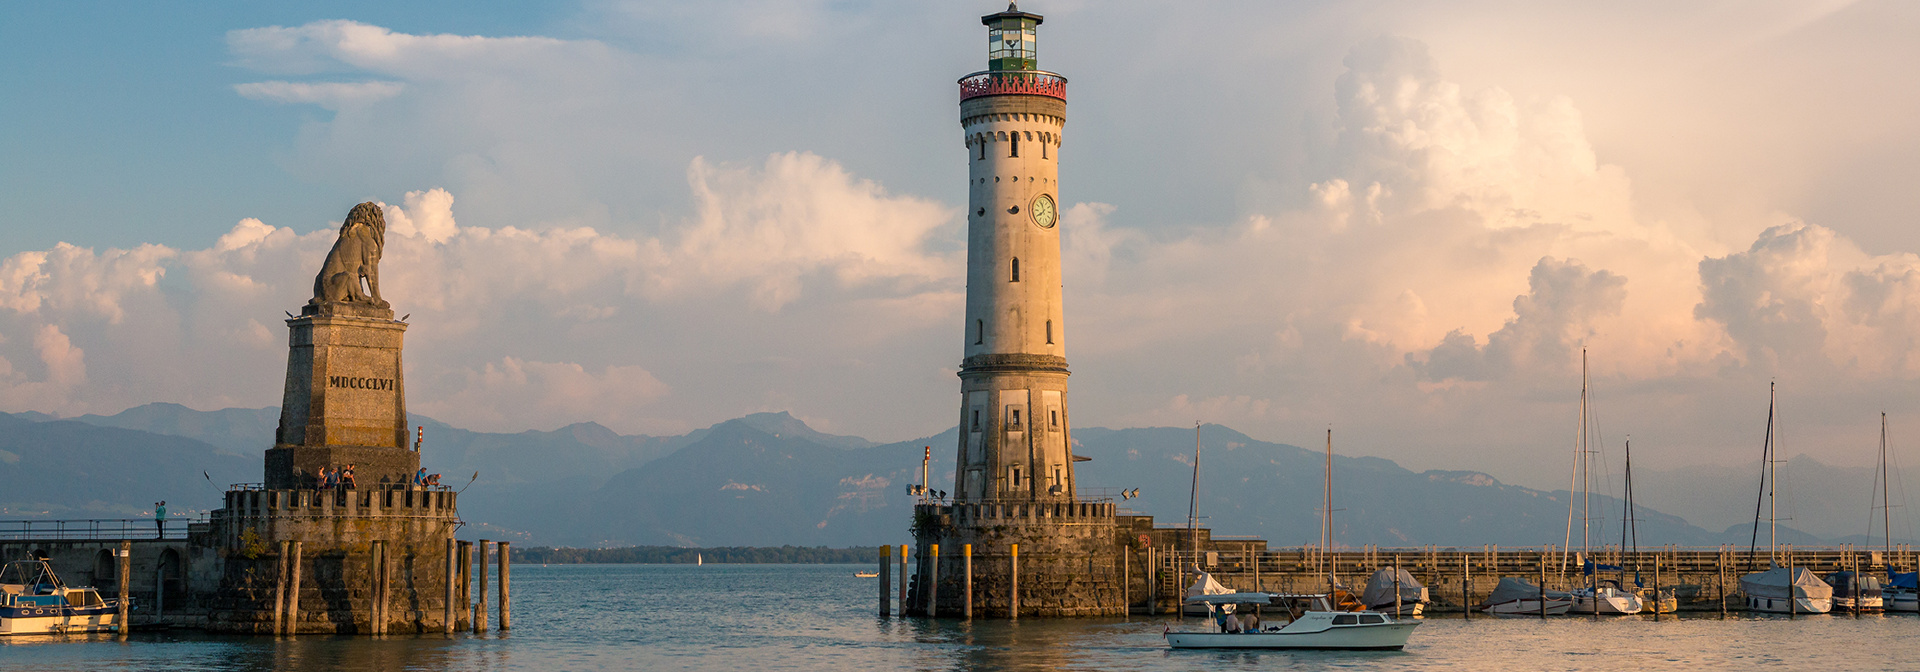 Germany: Lake Constance